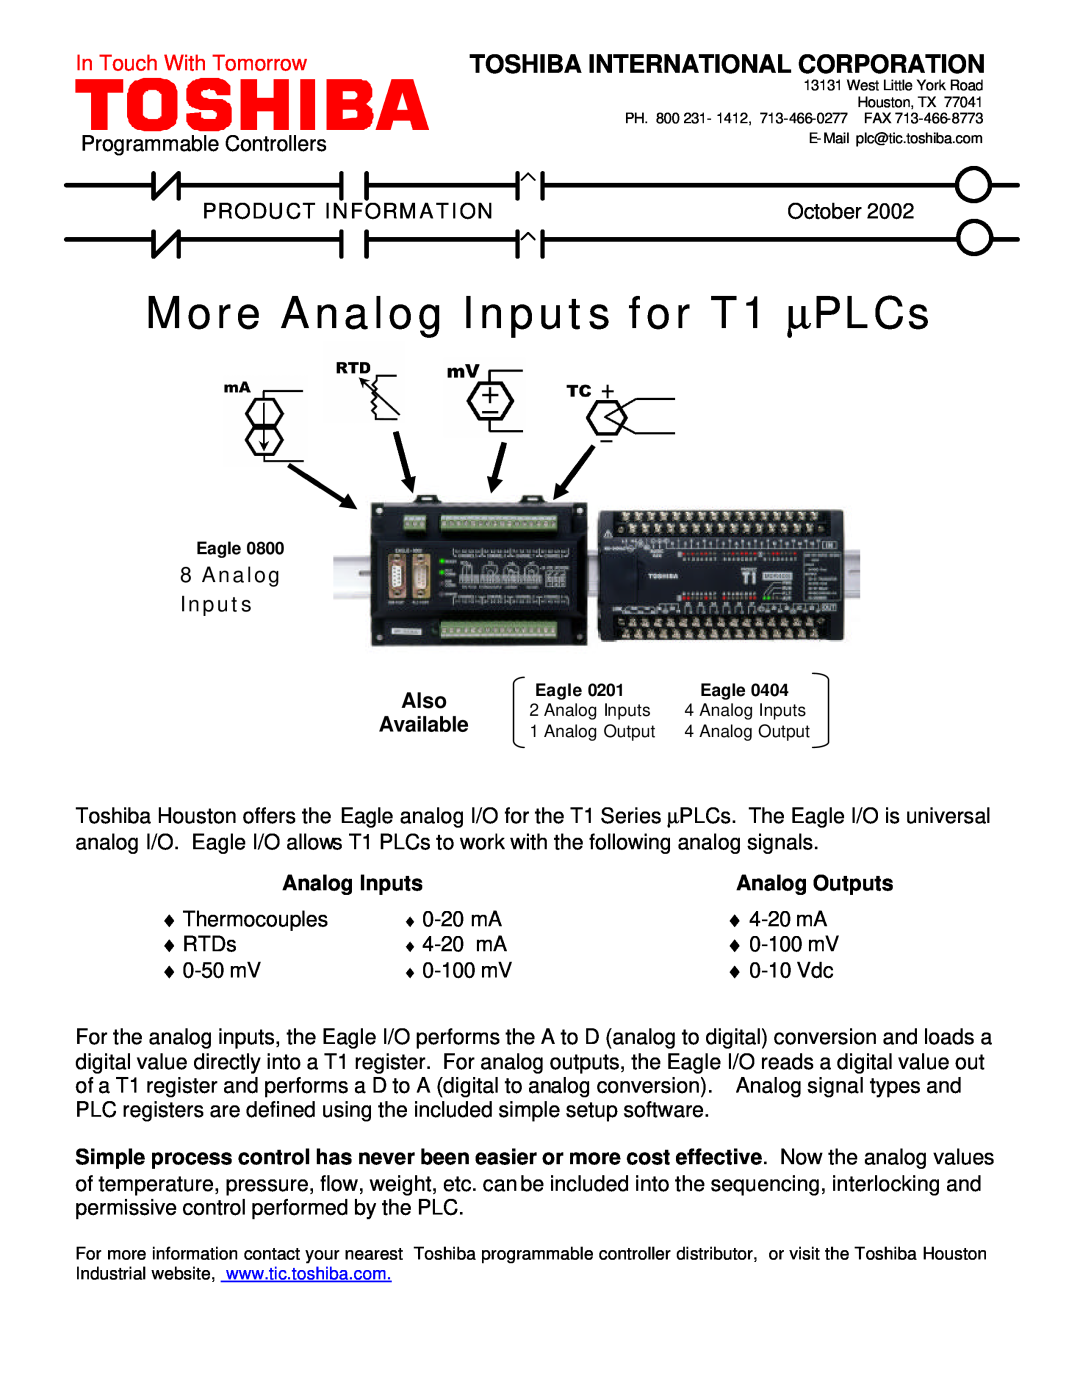 Toshiba T1 Series PLCs manual More Analog Inputs for T1 μPLCs, Toshiba International Corporation, In Touch With Tomorrow 